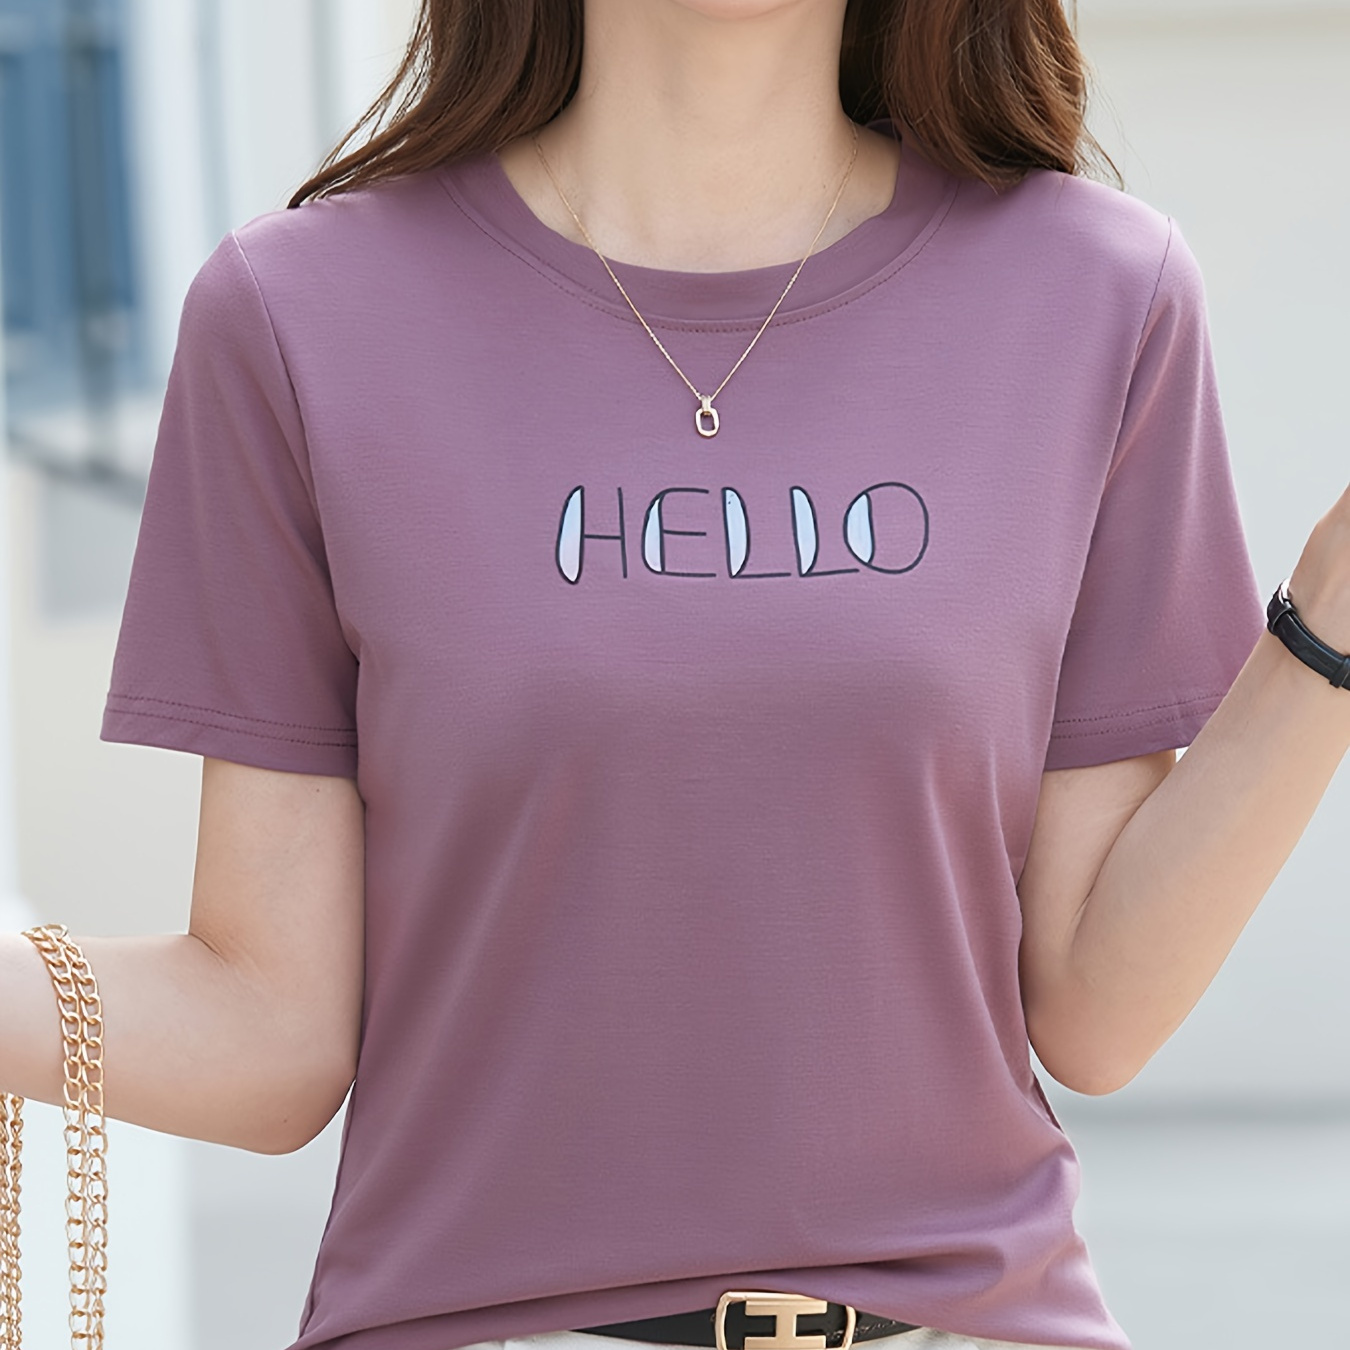 

Hello Print Crew Neck T-shirt, Casual Short Sleeve T-shirt For Spring & Summer, Women's Clothing